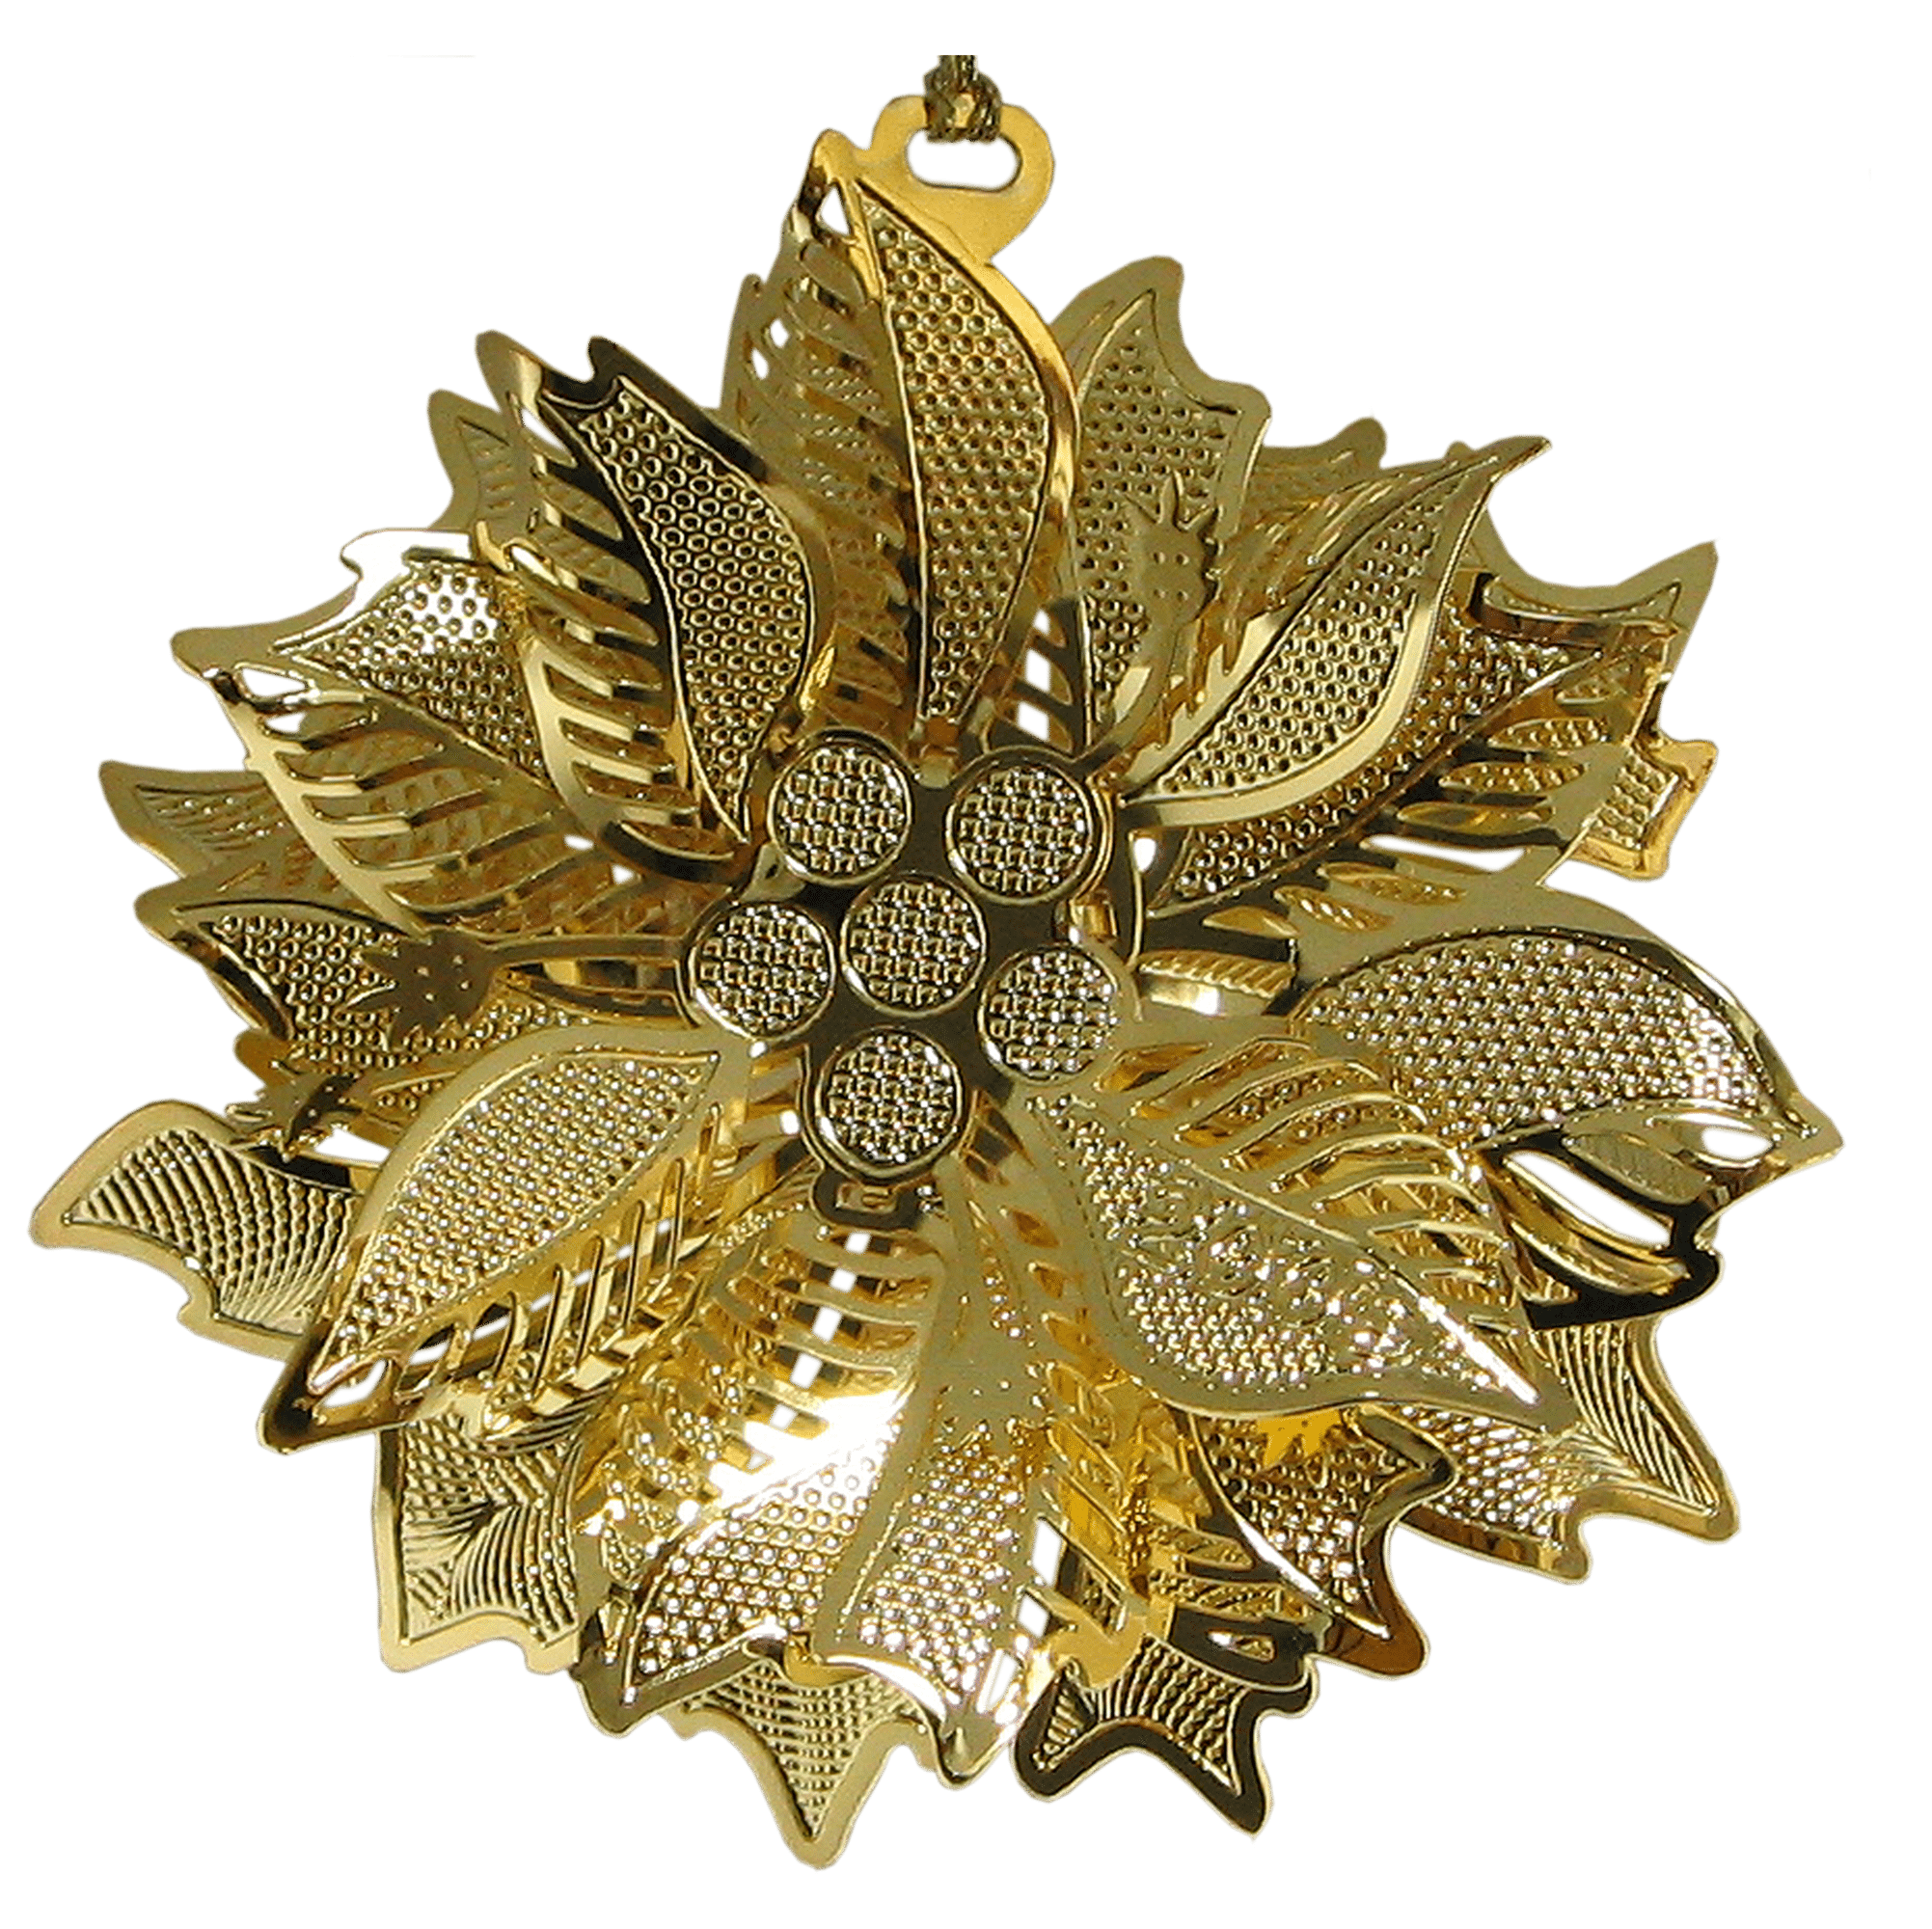 3-D Brass Ornament Plated in 24K Gold